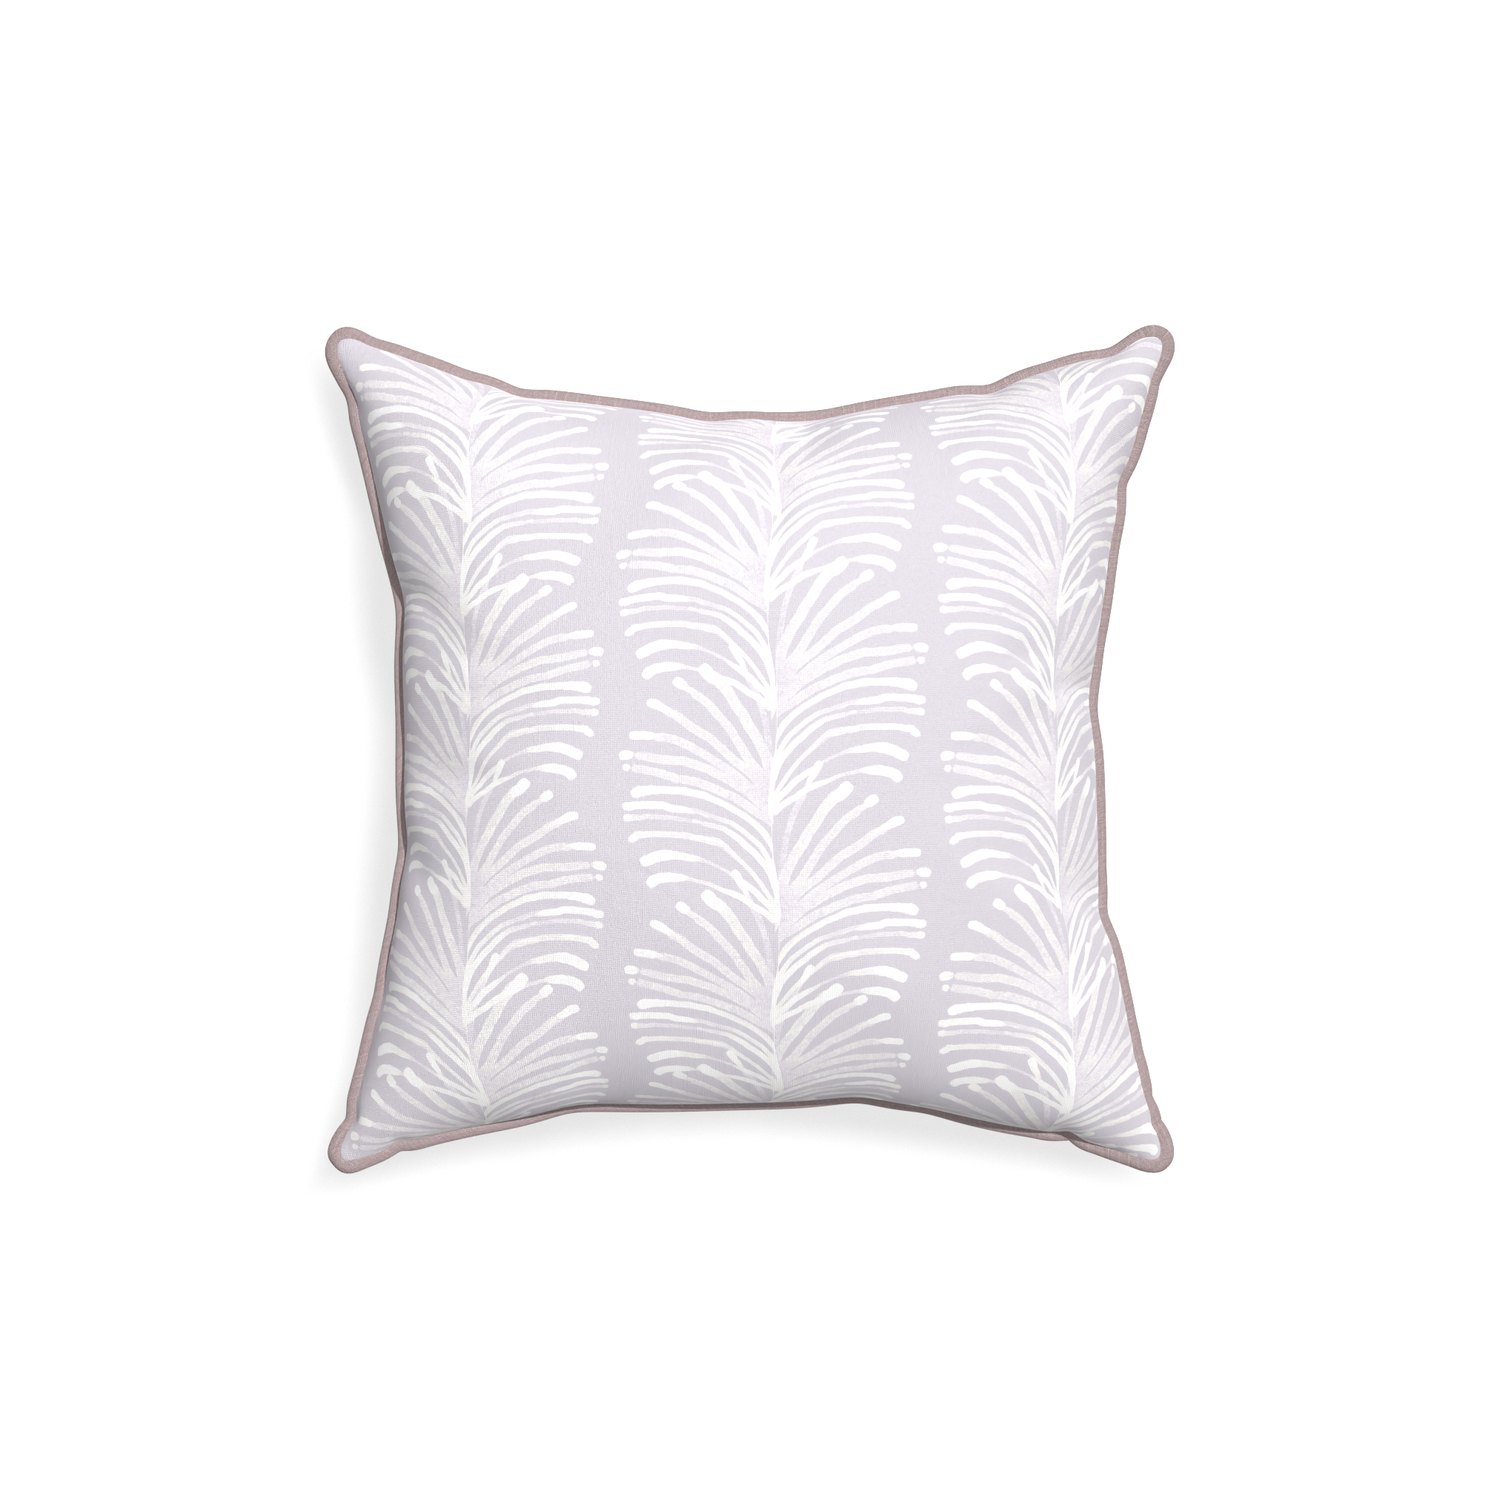 18-square emma lavender custom lavender botanical stripepillow with orchid piping on white background